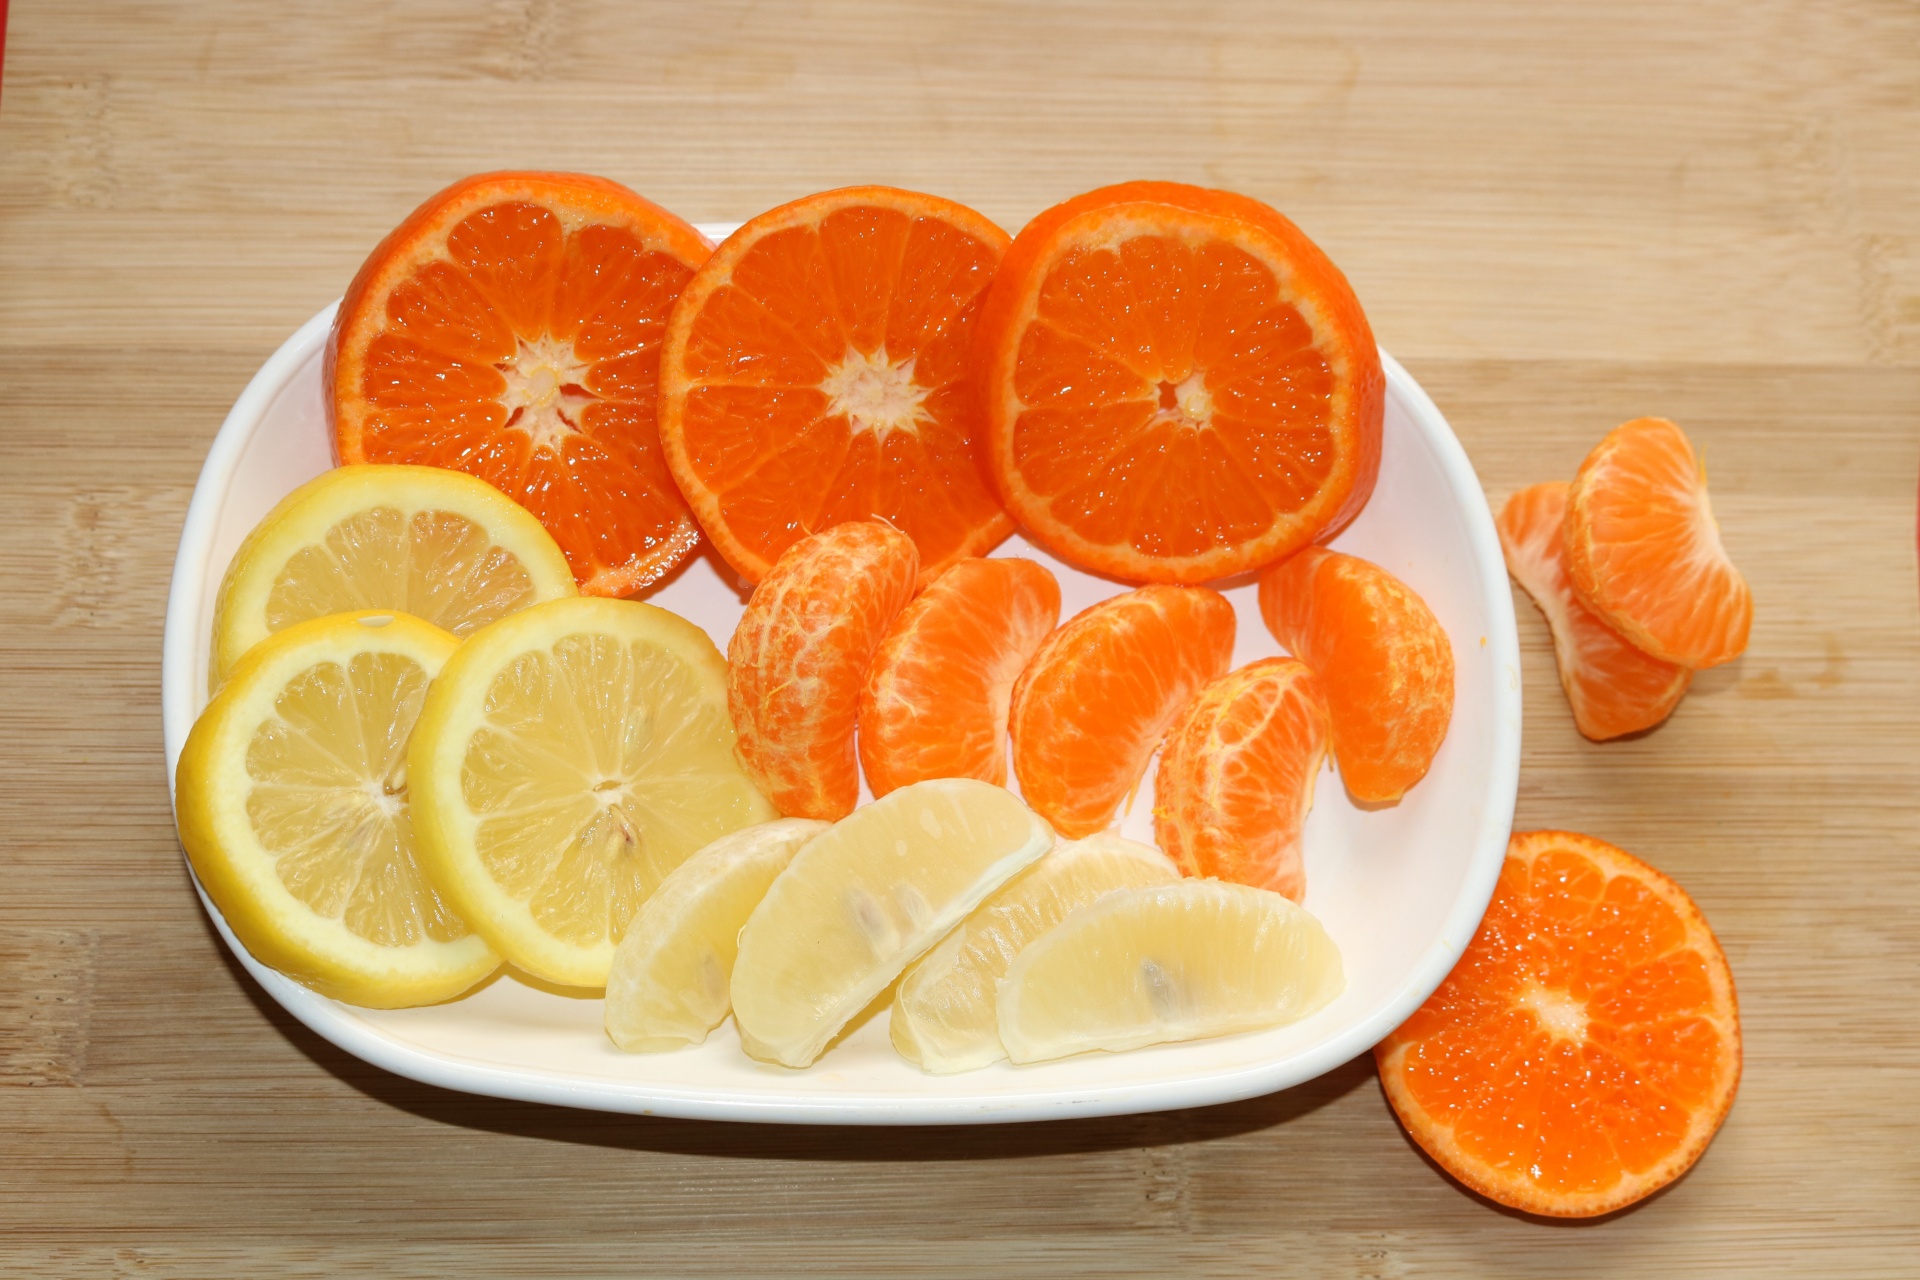 Slices and segments of oranges and lemons on a white plate with a wood background.